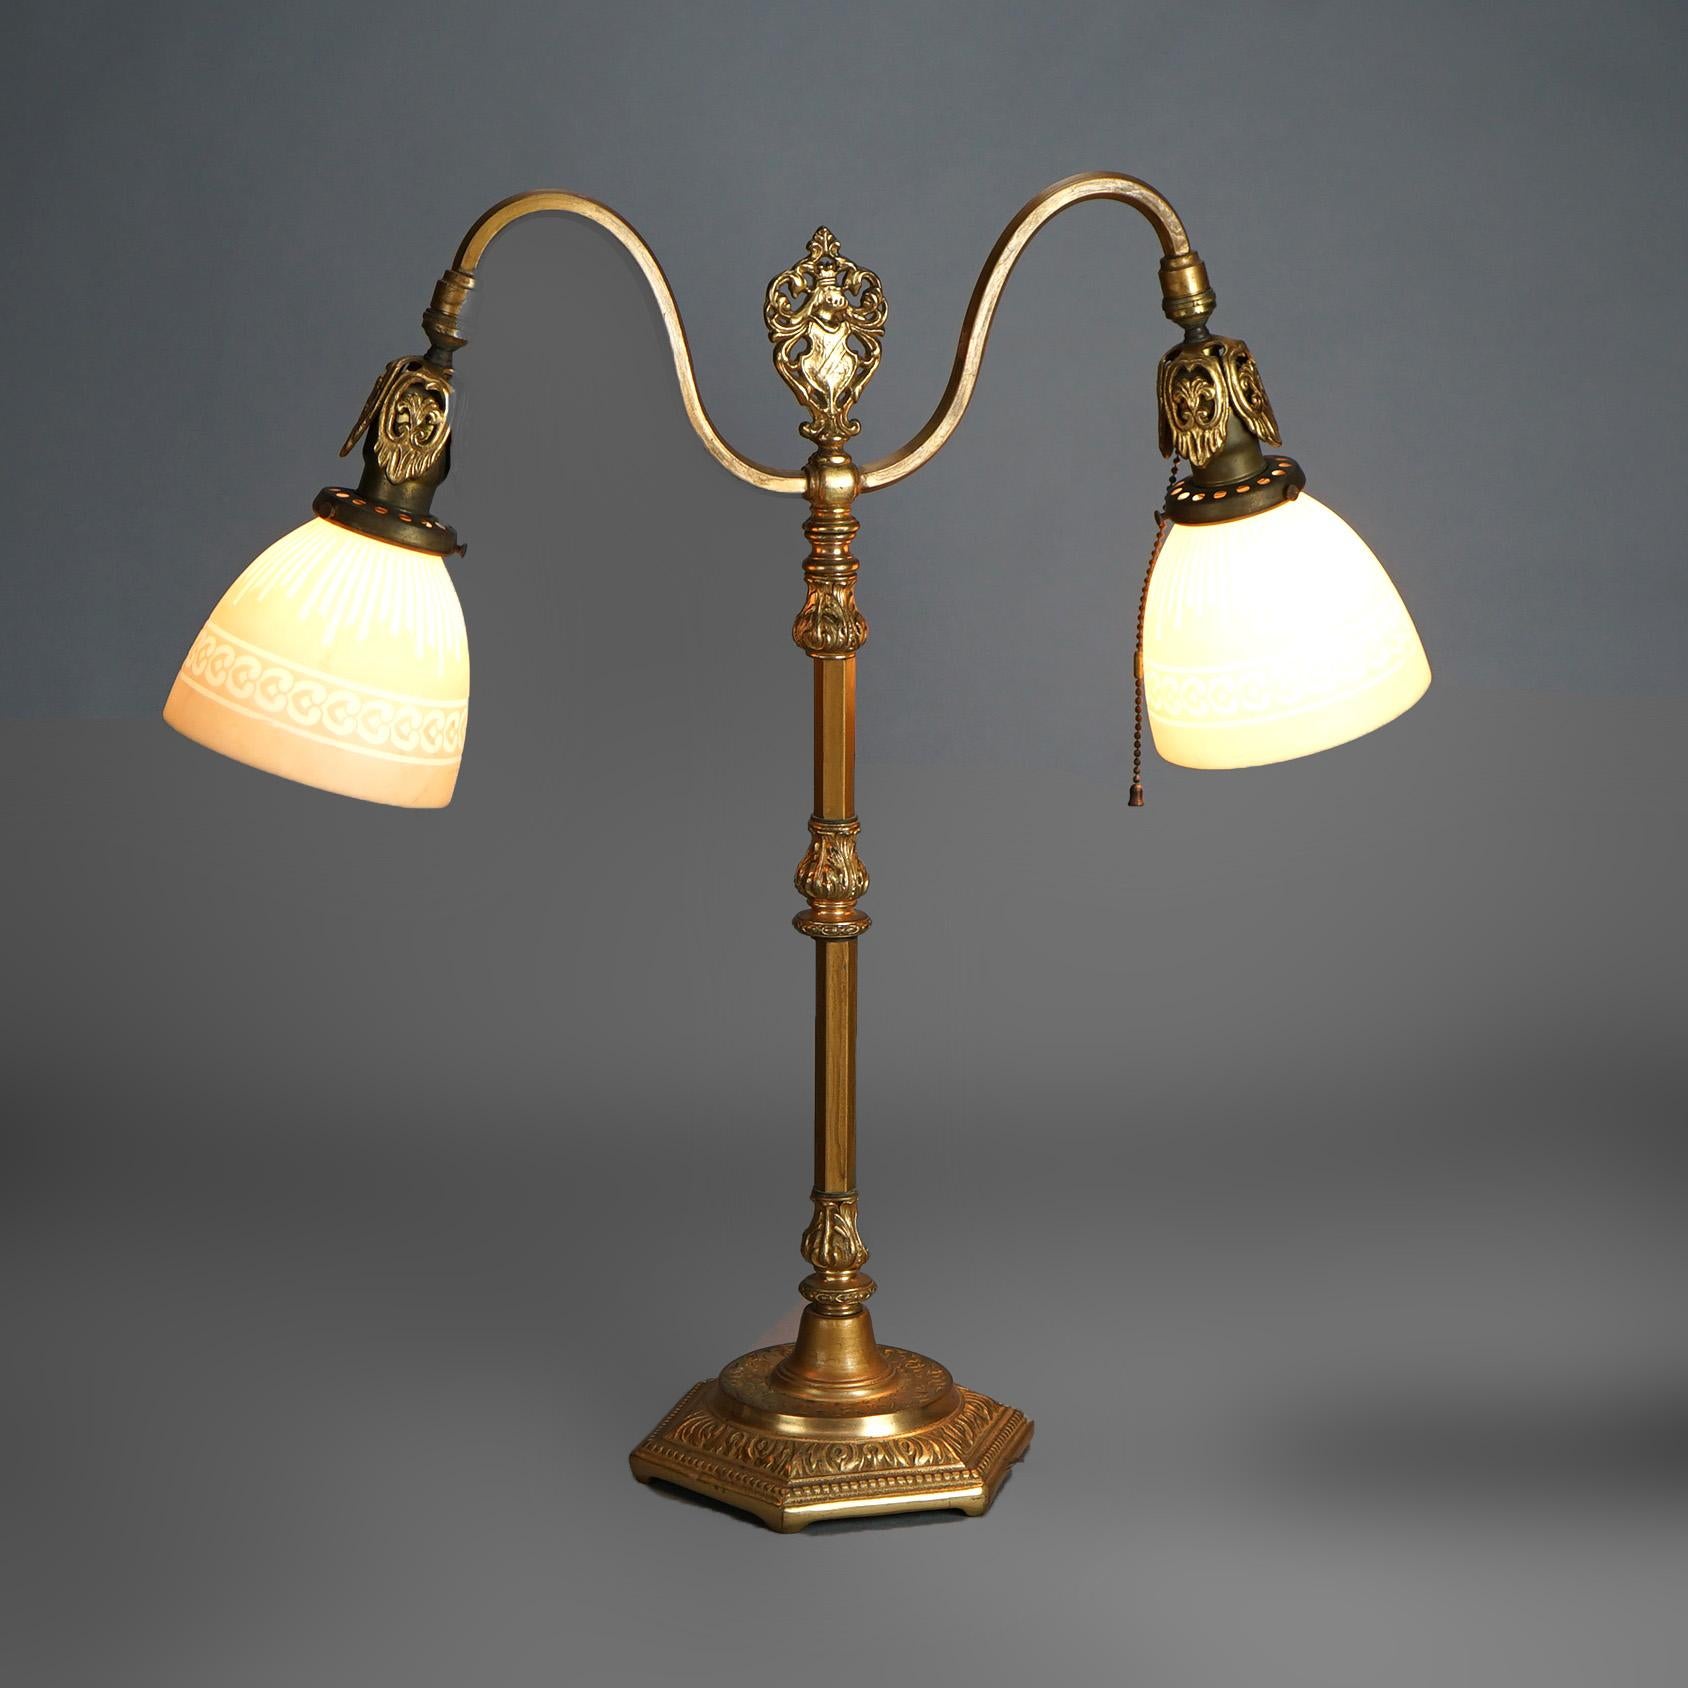 Antique Rembrandt Two-Light Foliate Embossed Brass Table Lamp with Art Glass Shades Circa 1920

Measures- 23''H x 22''W x 7''D